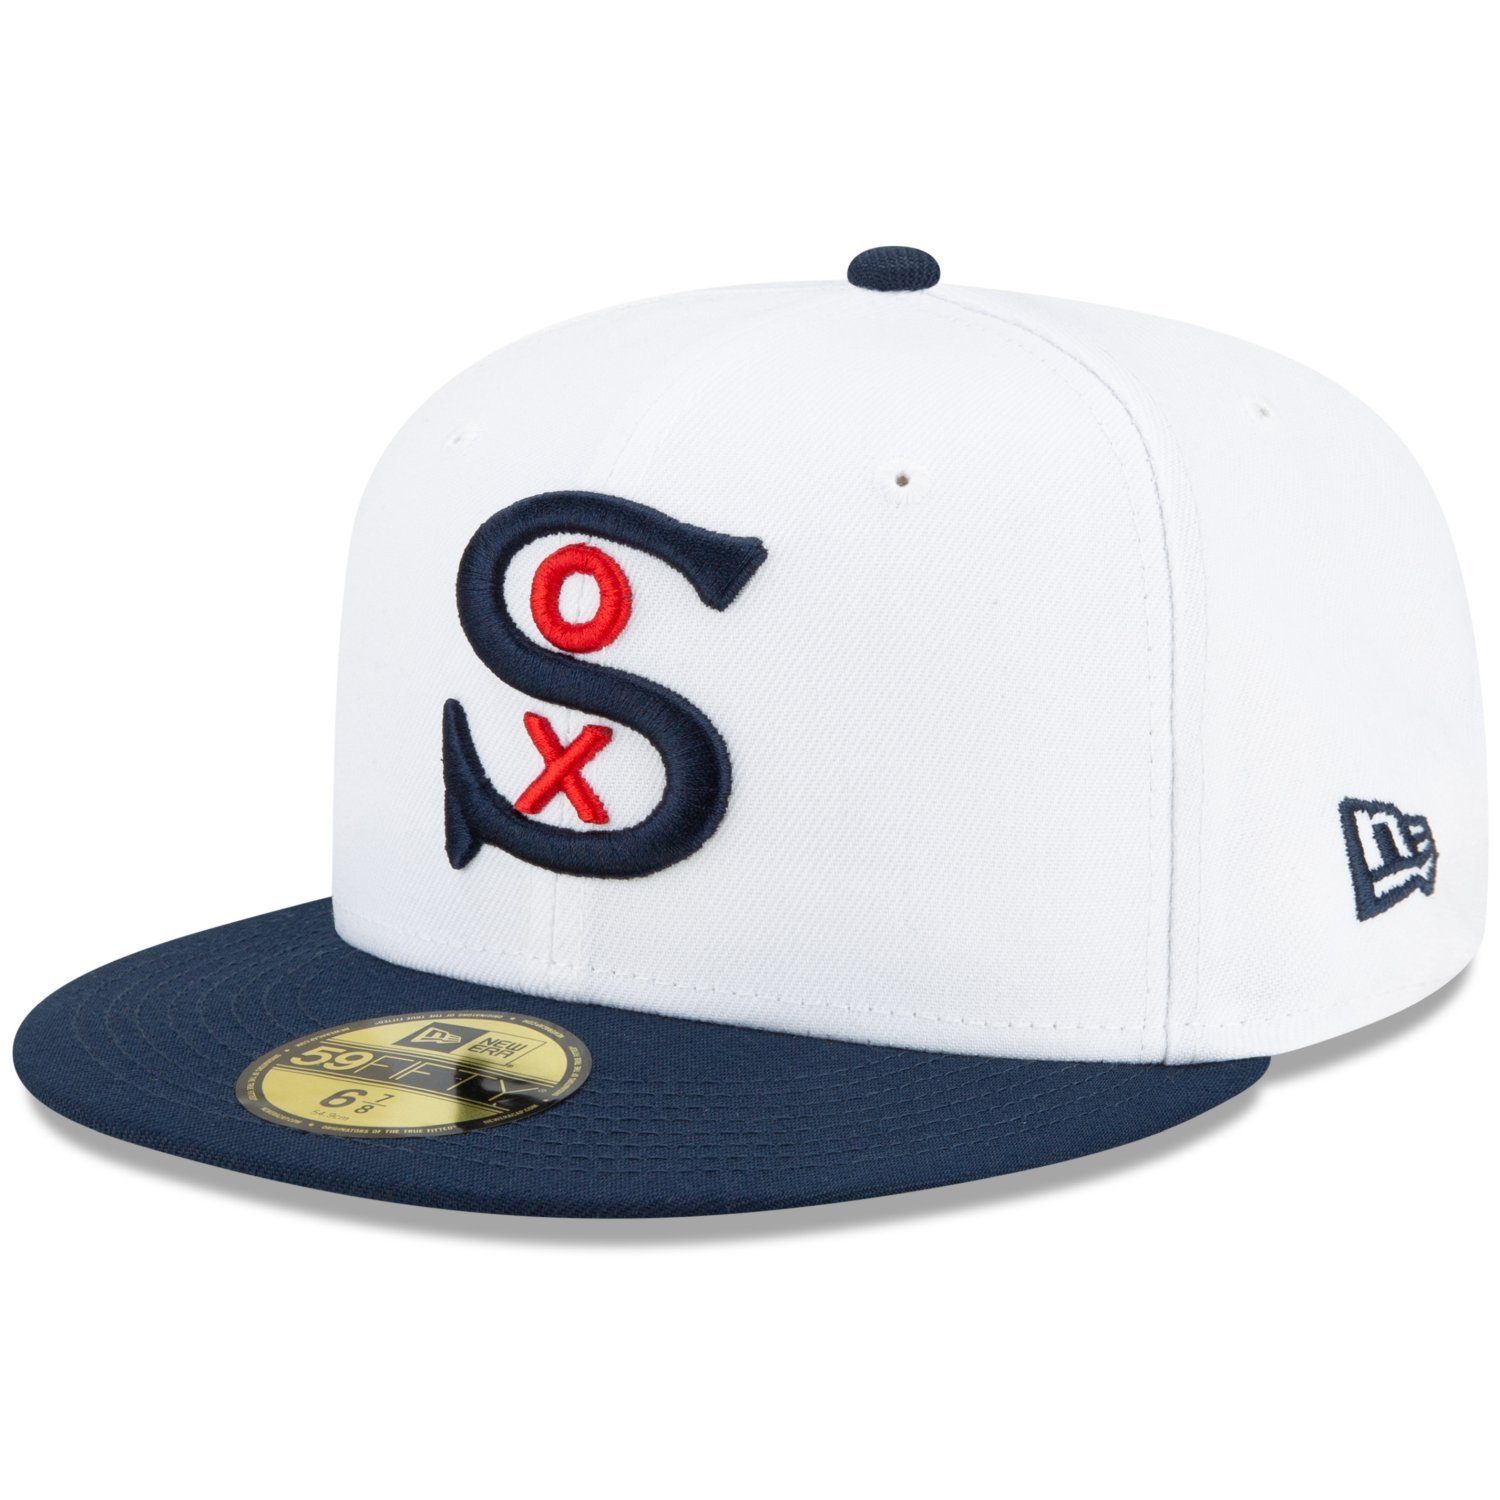 Era New SERIES Chicago Fitted WORLD 59Fifty Cap White Sox